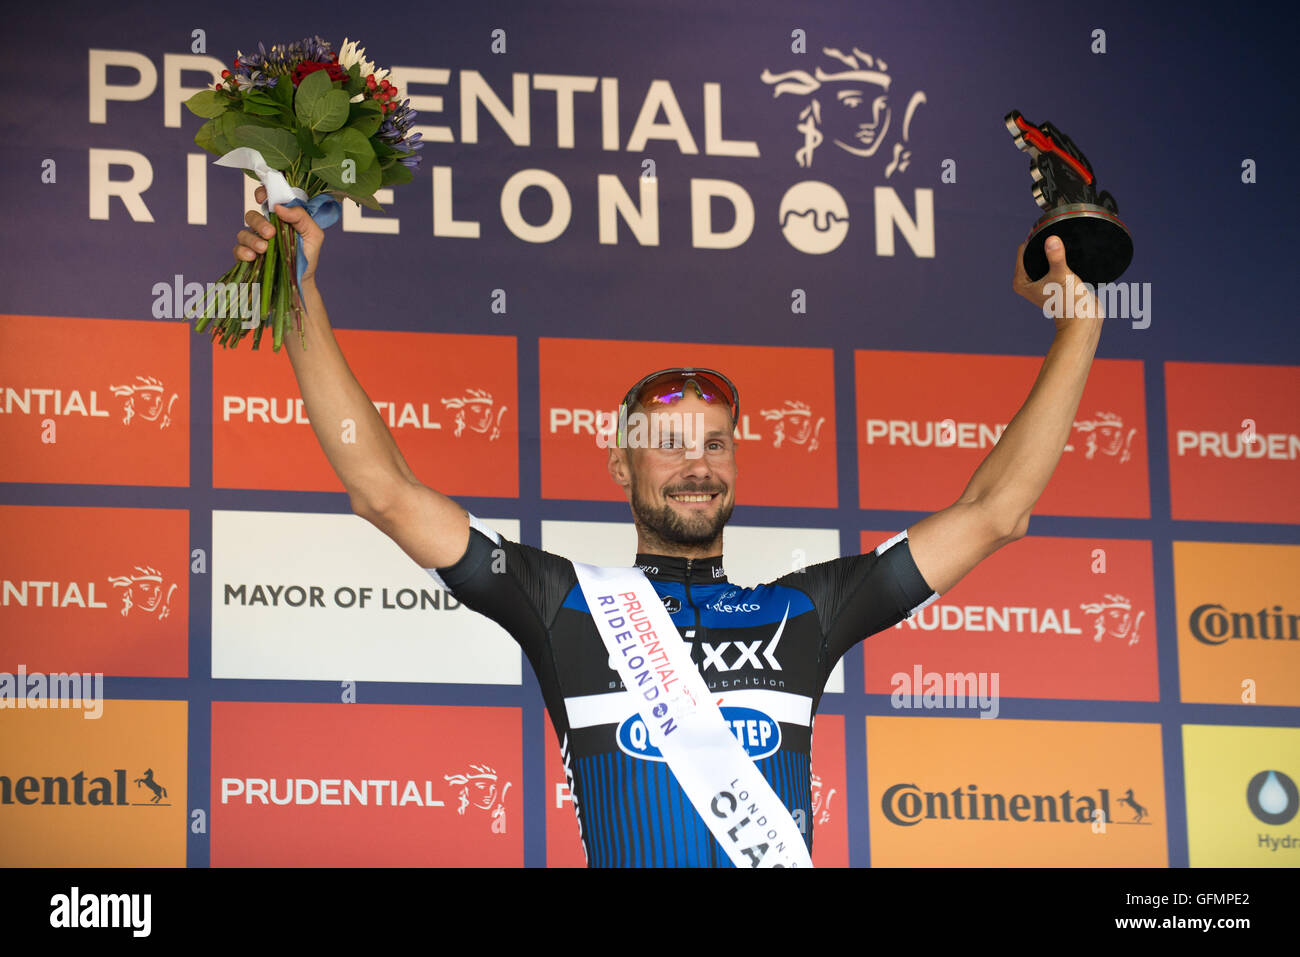 London, UK. 31st July, 2016. Tom Boonen (Belgium) wins the Prudential Ride London 2016 - Men’s Classic with Team Sky, Team GB, Chris Froome ant Tom Boonen, London UK - 31st July 2016 Credit: Alberto Pezzali/Alamy Live News Stock Photo